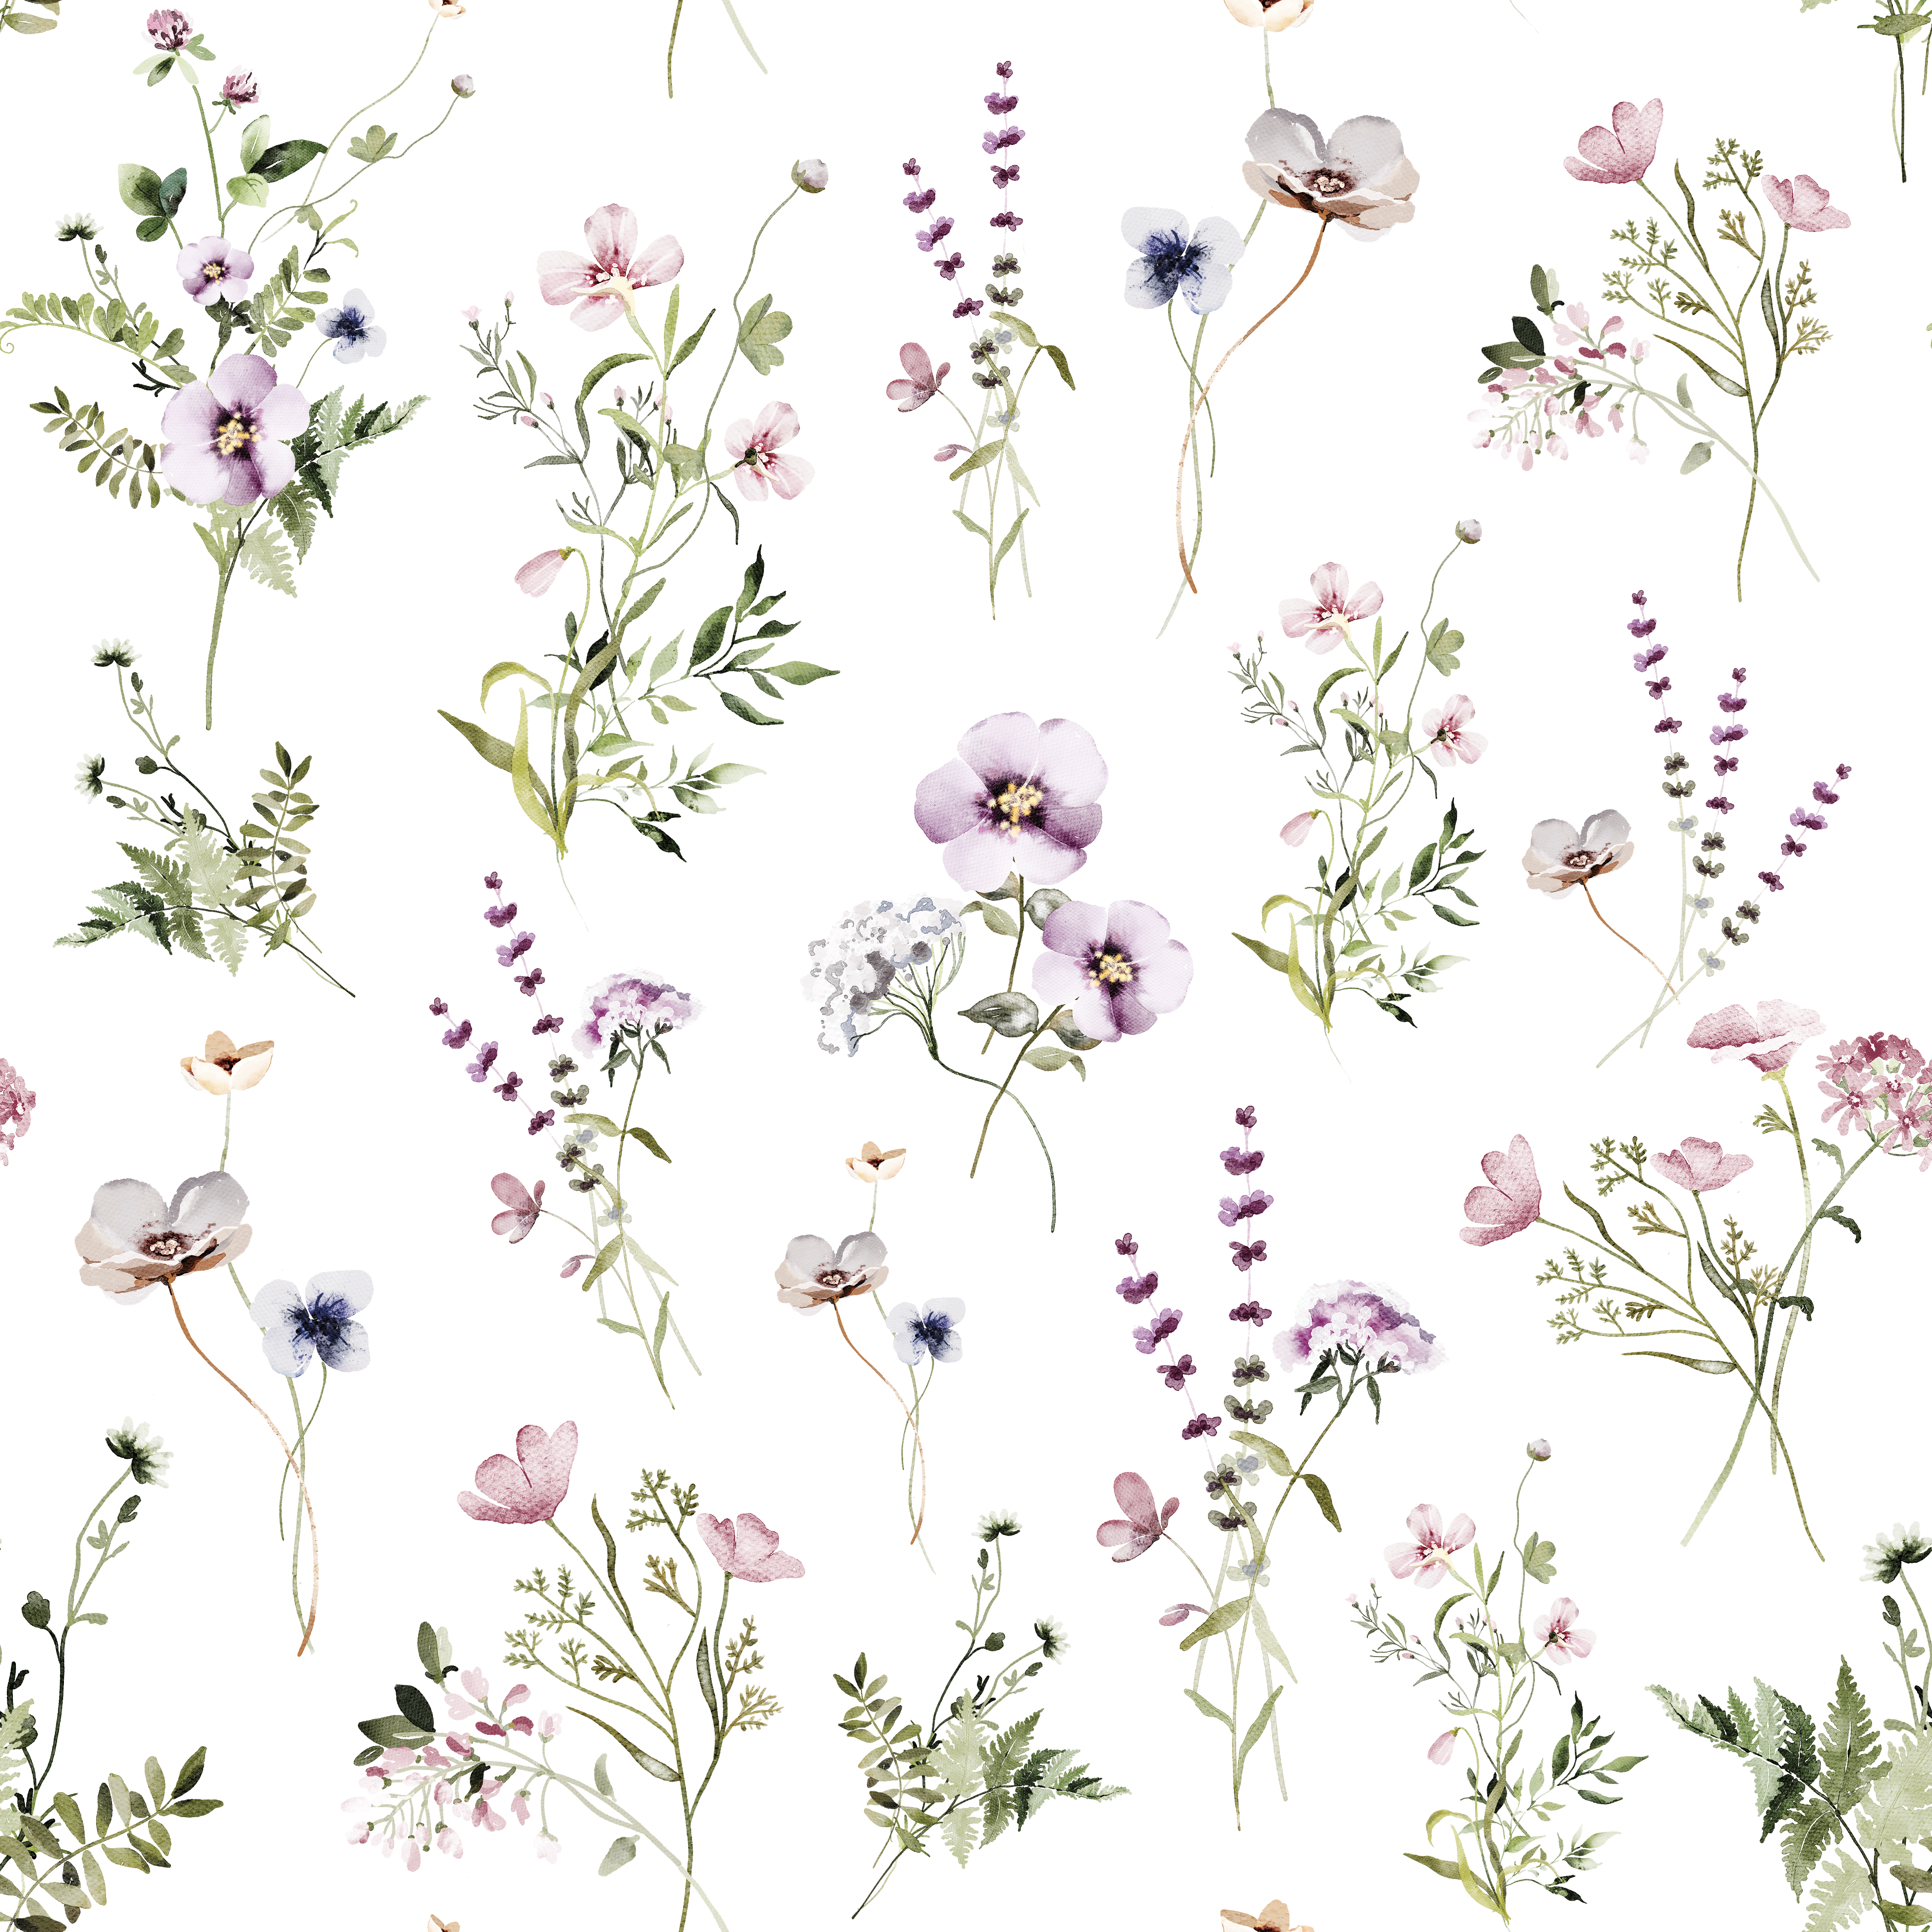 A detailed view of the 'Midsummer Watercolour Bouquet Wallpaper - Raspberry', showcasing its vibrant watercolor flowers in raspberry, purple, and green hues on a white background, exuding the freshness of a midsummer garden.